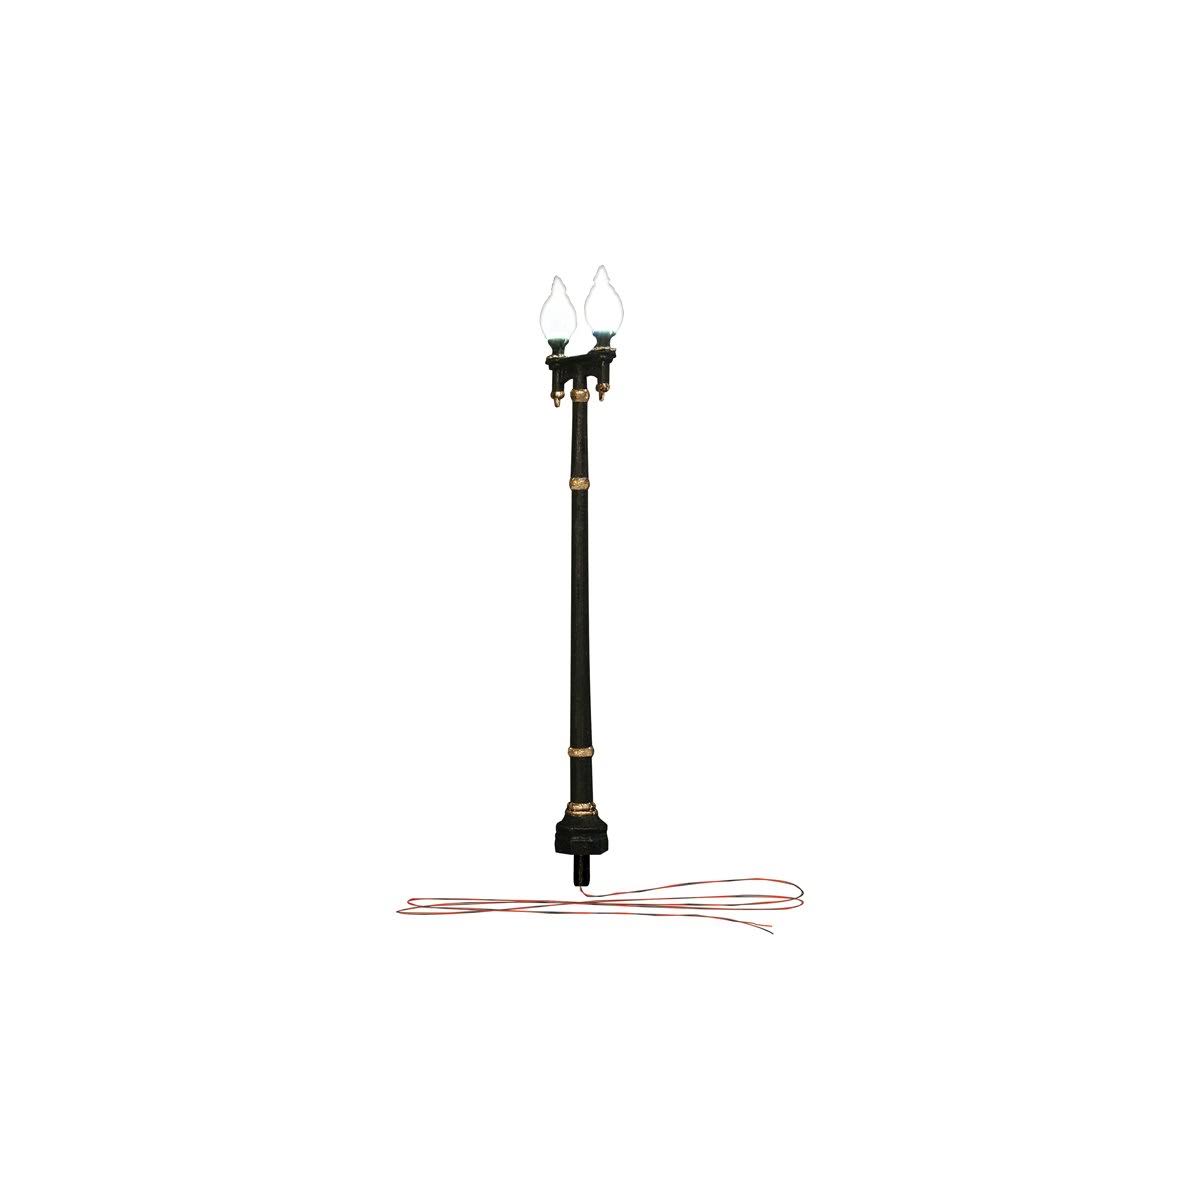 Woodland Scenics O-Scale Double Lamp Post Street Lights - 2-Pack